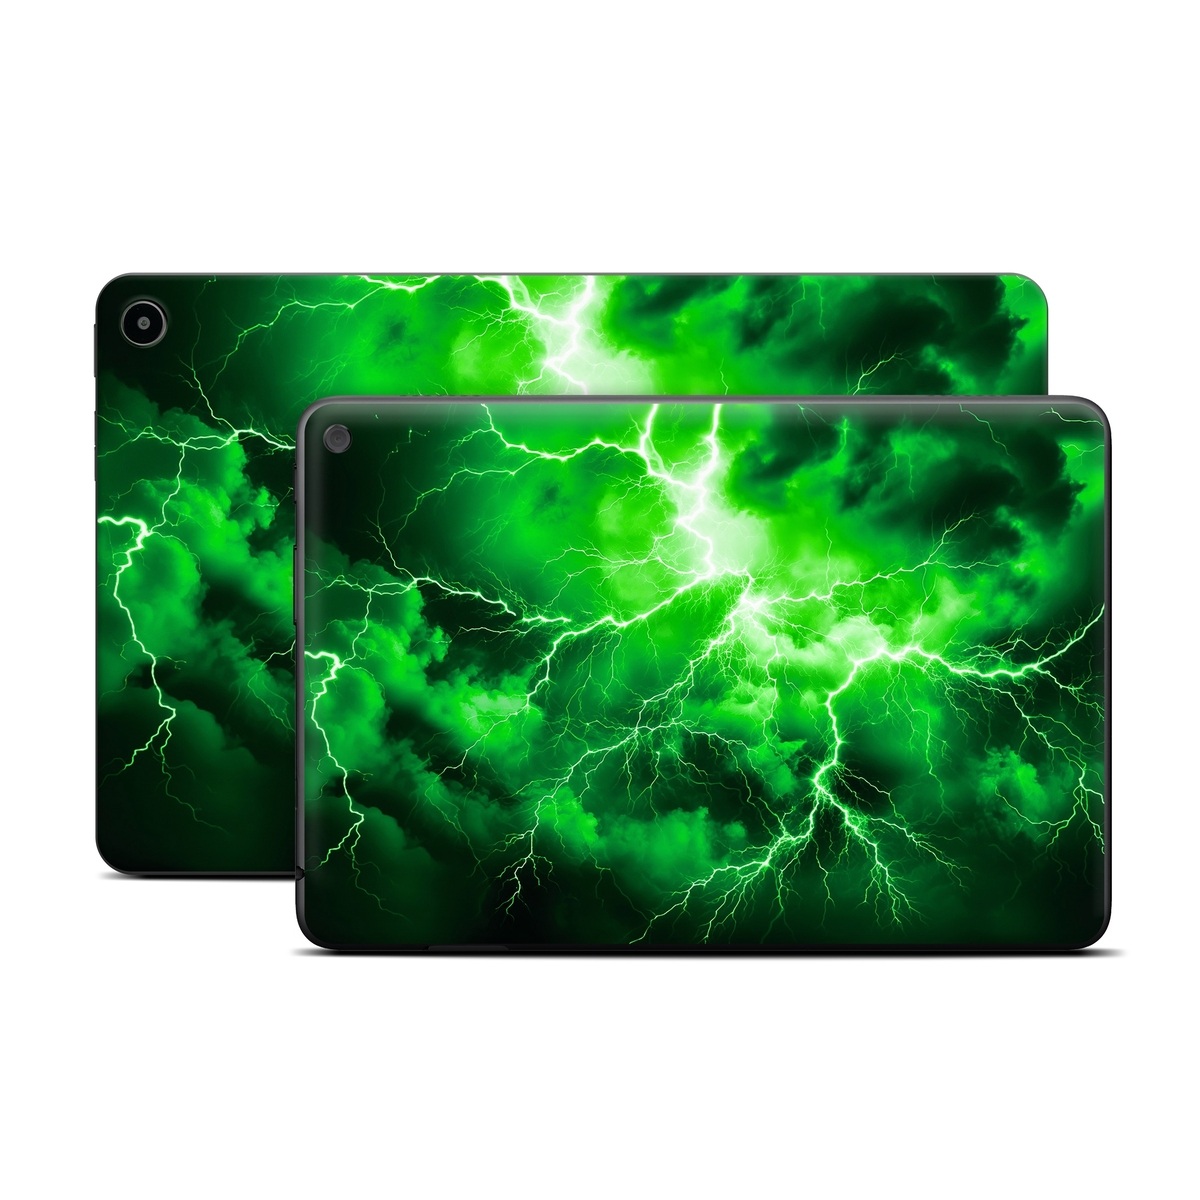 Amazon Fire Tablet Series Skin Skin design of Water, Atmosphere, Thunder, Light, Green, Sky, Natural environment, Natural landscape, Electricity, Organism, with black, green colors